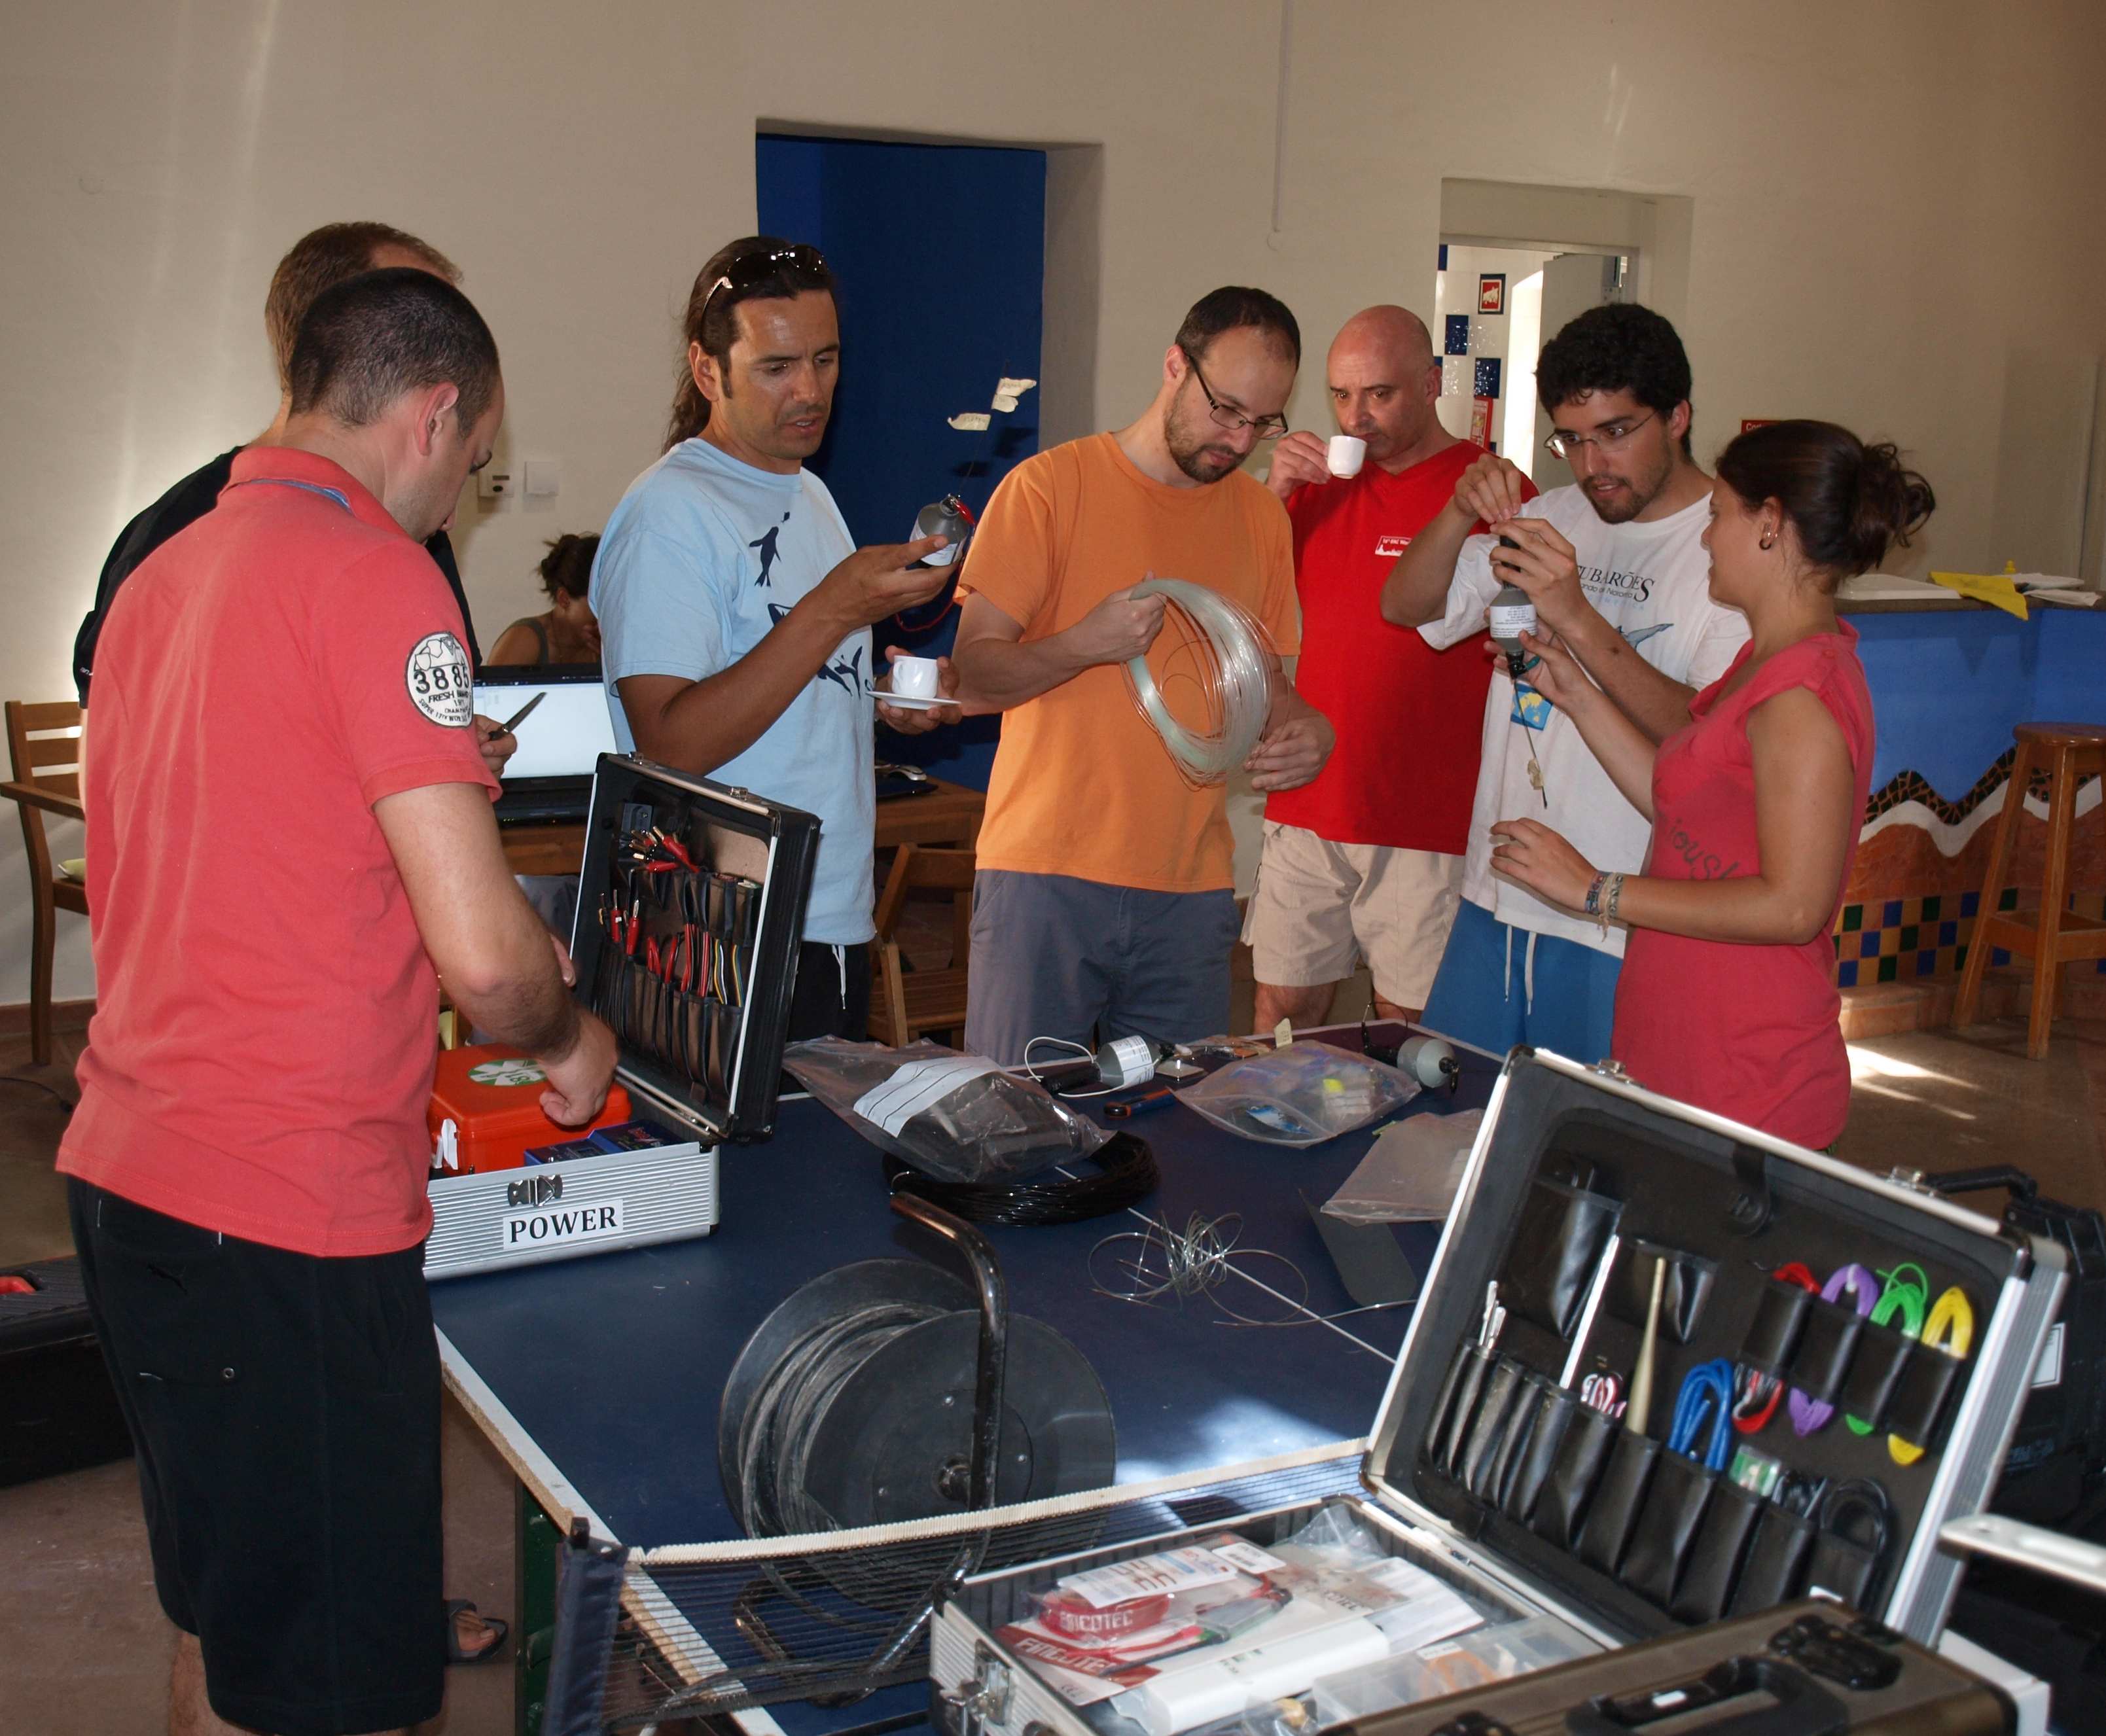 A working Sunday for all. People gathered around pitching in to build FEUP designed ARGOS tags with a tether. From left: Filipe, Renato, Jorge Fontes, Nuno, João, Fortuna and Ana Couto.